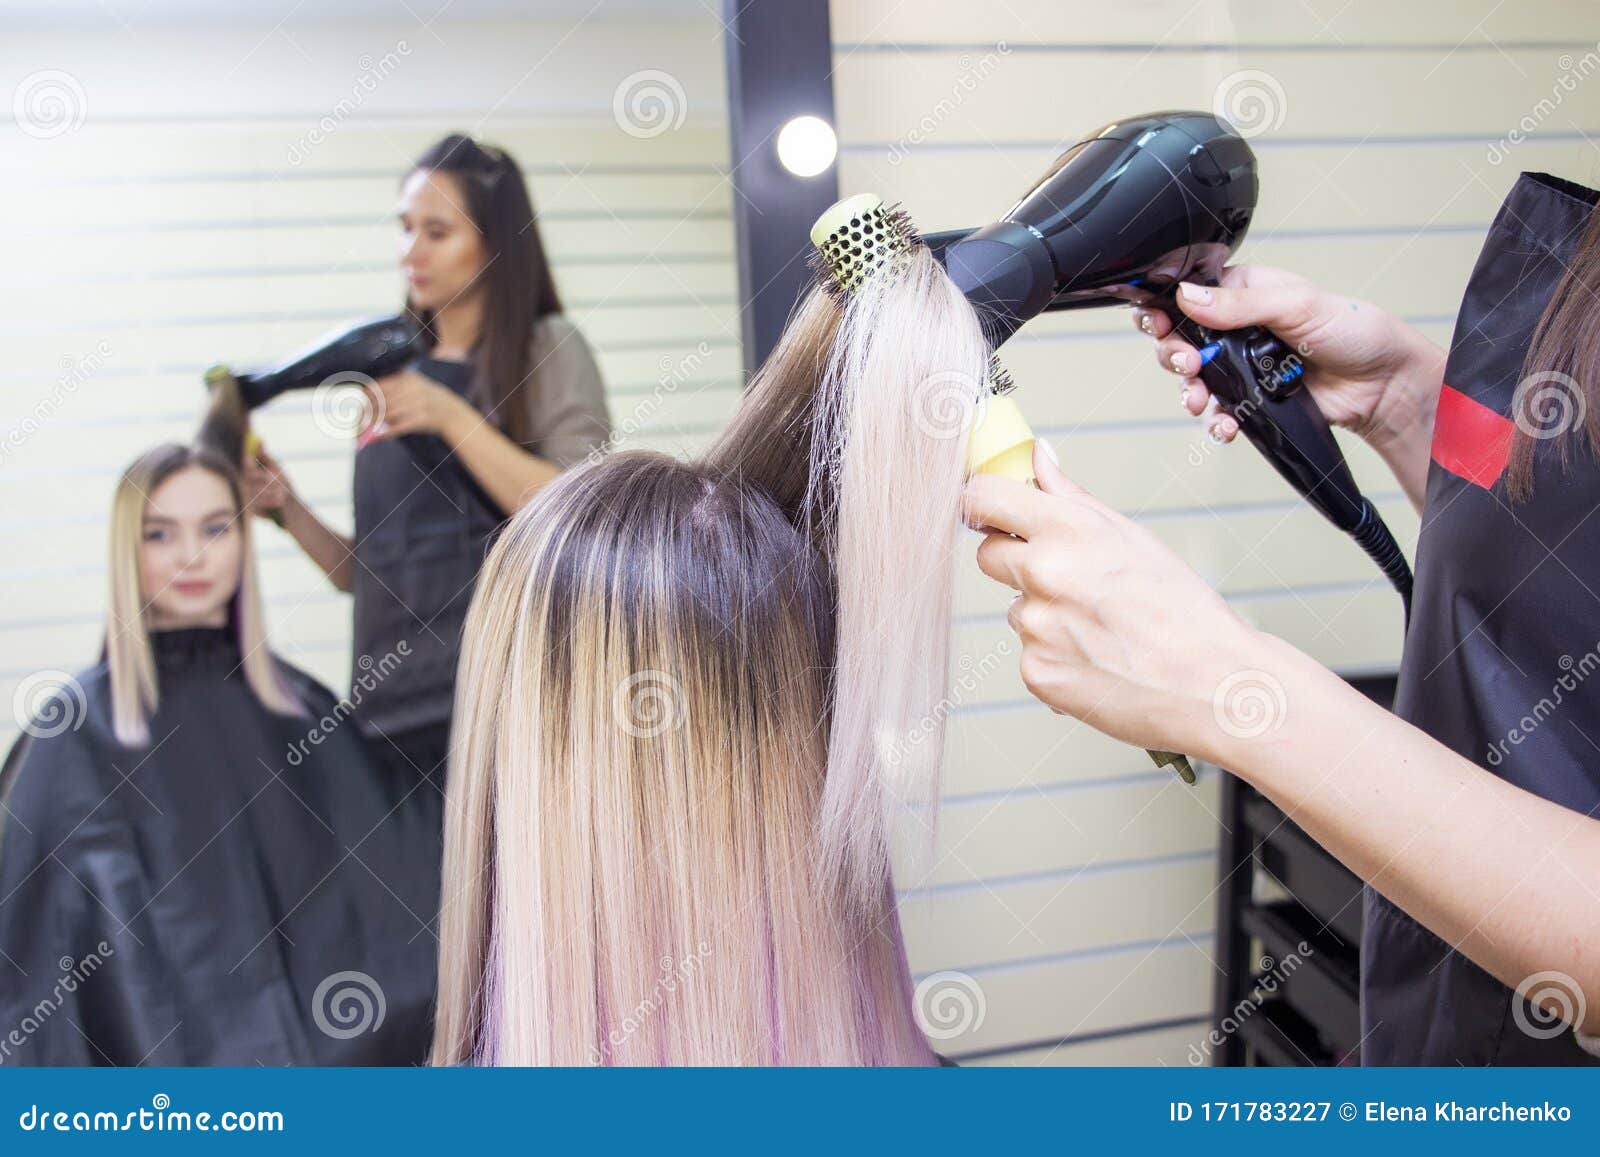 How to Blow Dry Mens Hair with Pictures  wikiHow